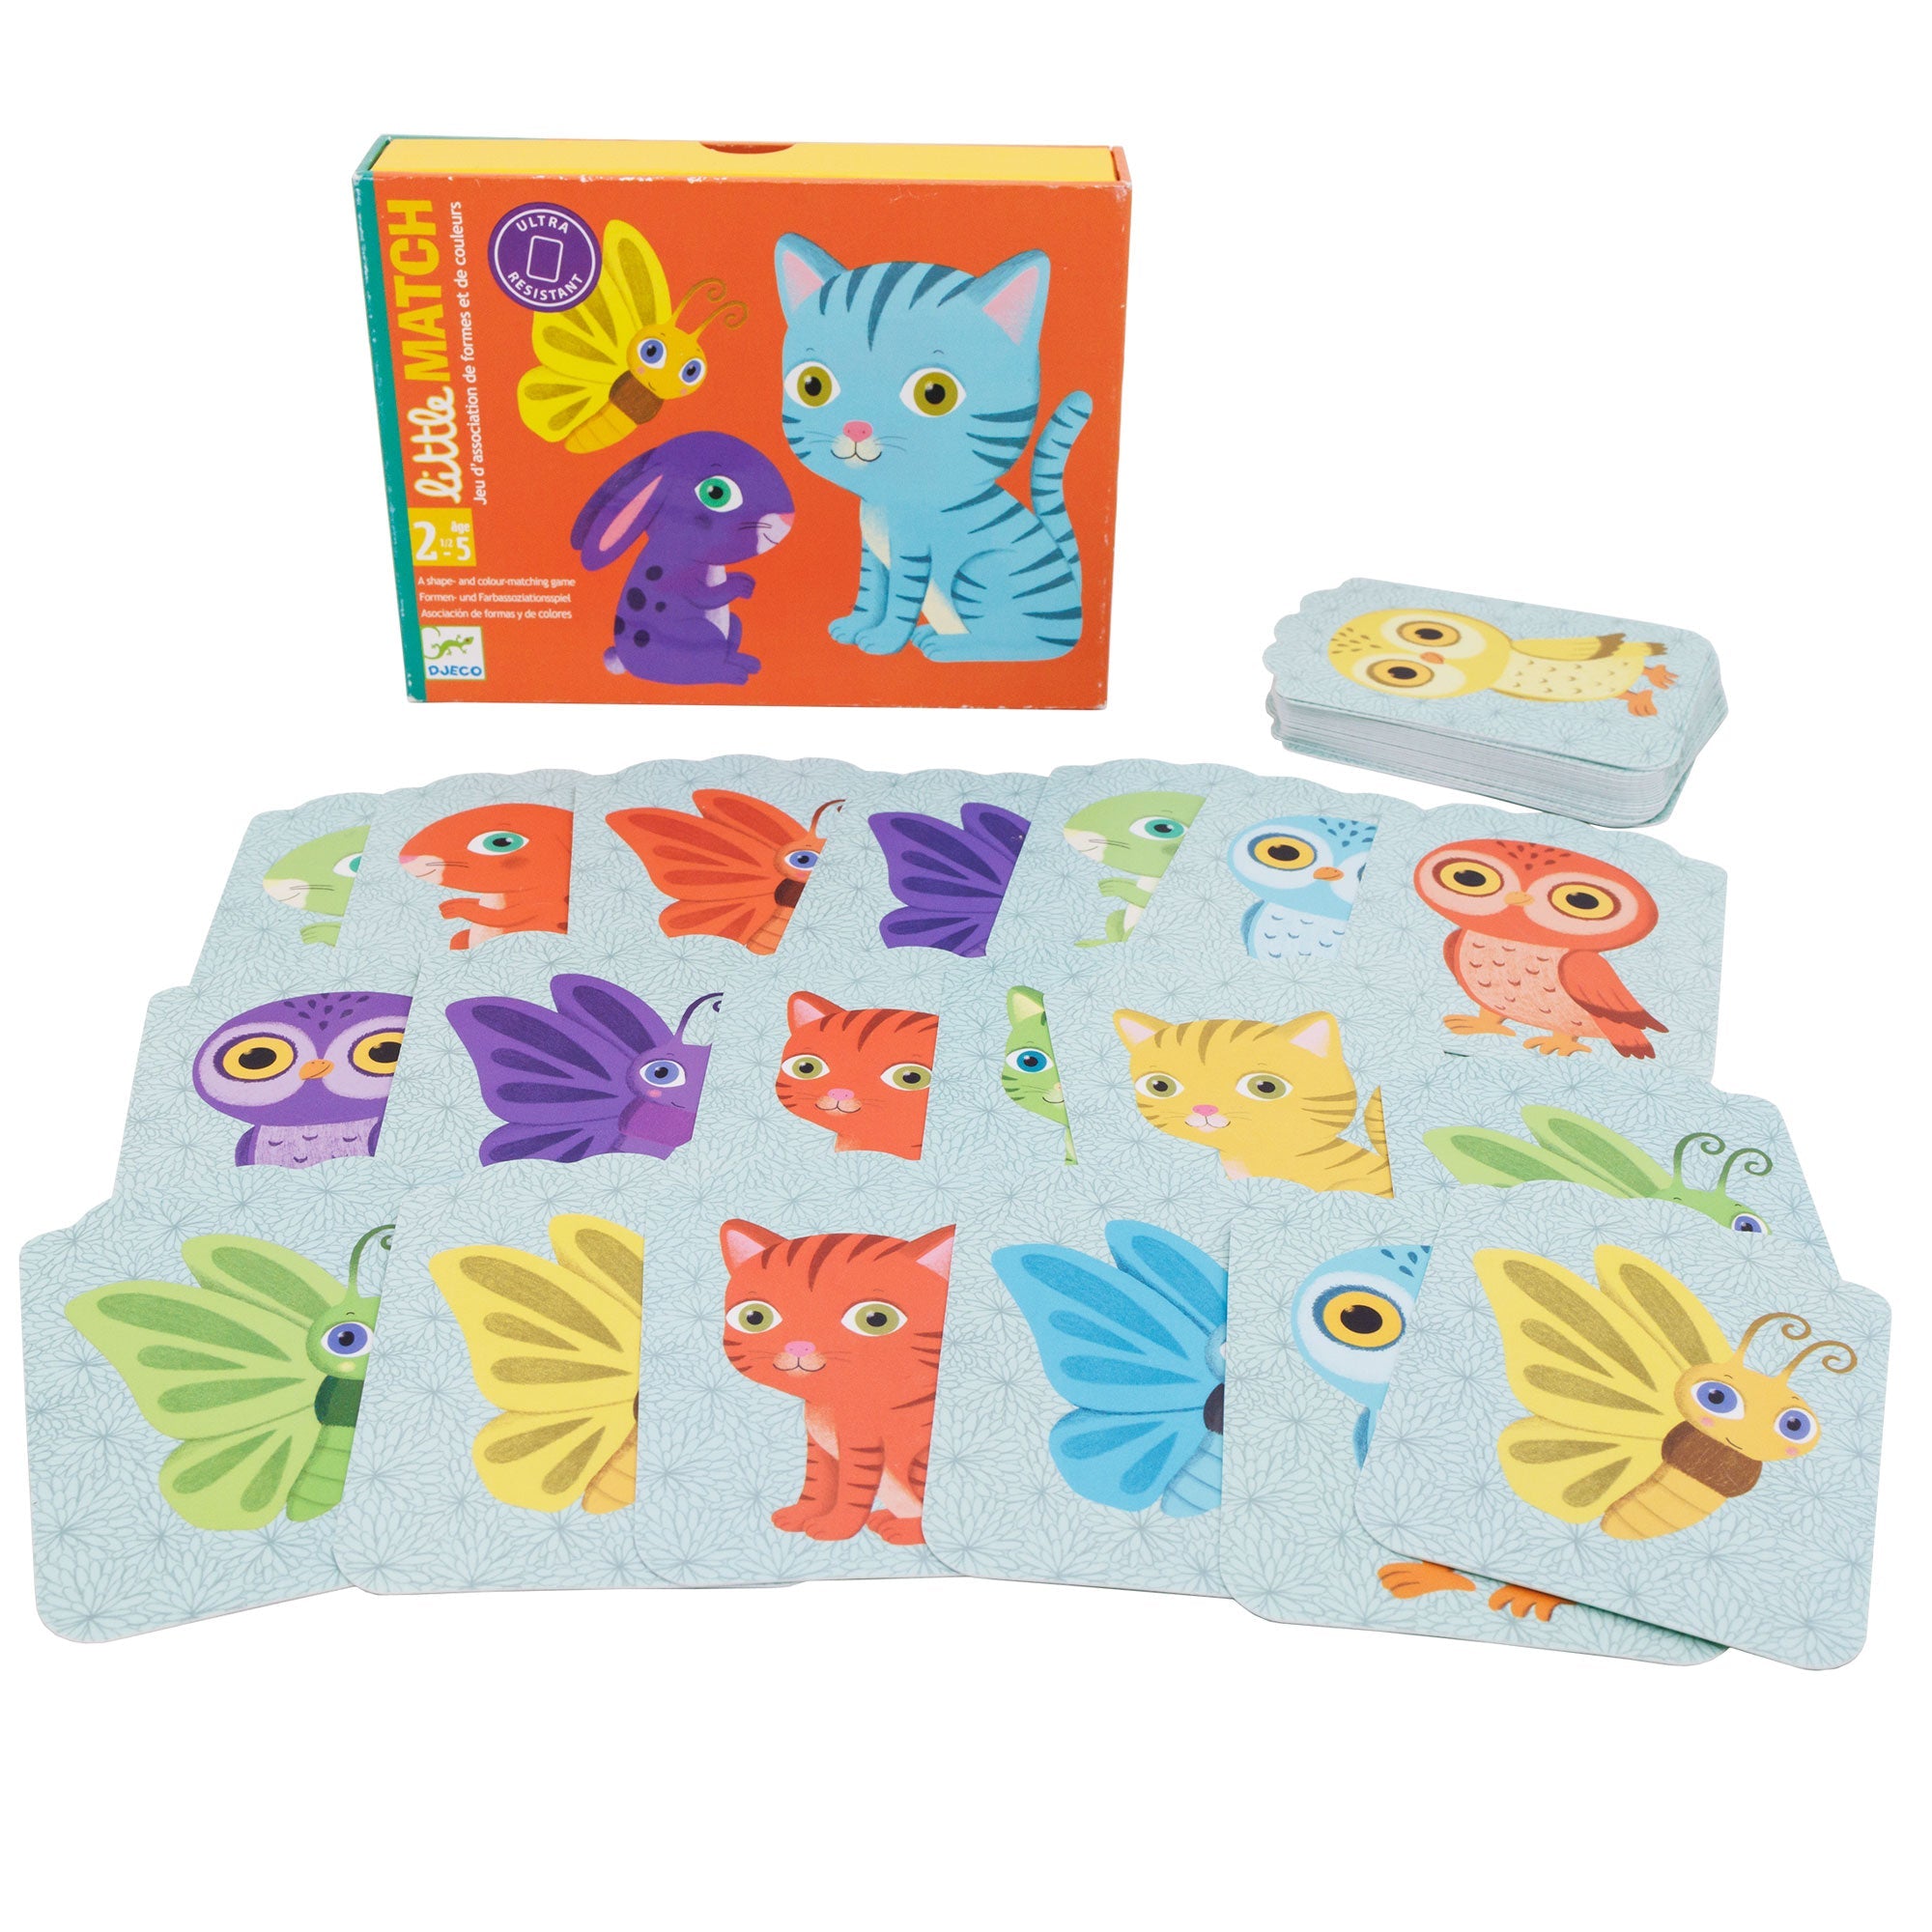 Djeco Little Match game box with cards spread out. The box in the back is dark orange with 3 animals in the middle; a yellow butterfly, blue cat, and purple bunny. They are all smiling and looking straight at you. To the right of the box is a stack of cards. In the front, there are 3 rows of cards. The cards have different colored animals on each. The animals on the cards are a cat, butterfly, owl, and bunny.